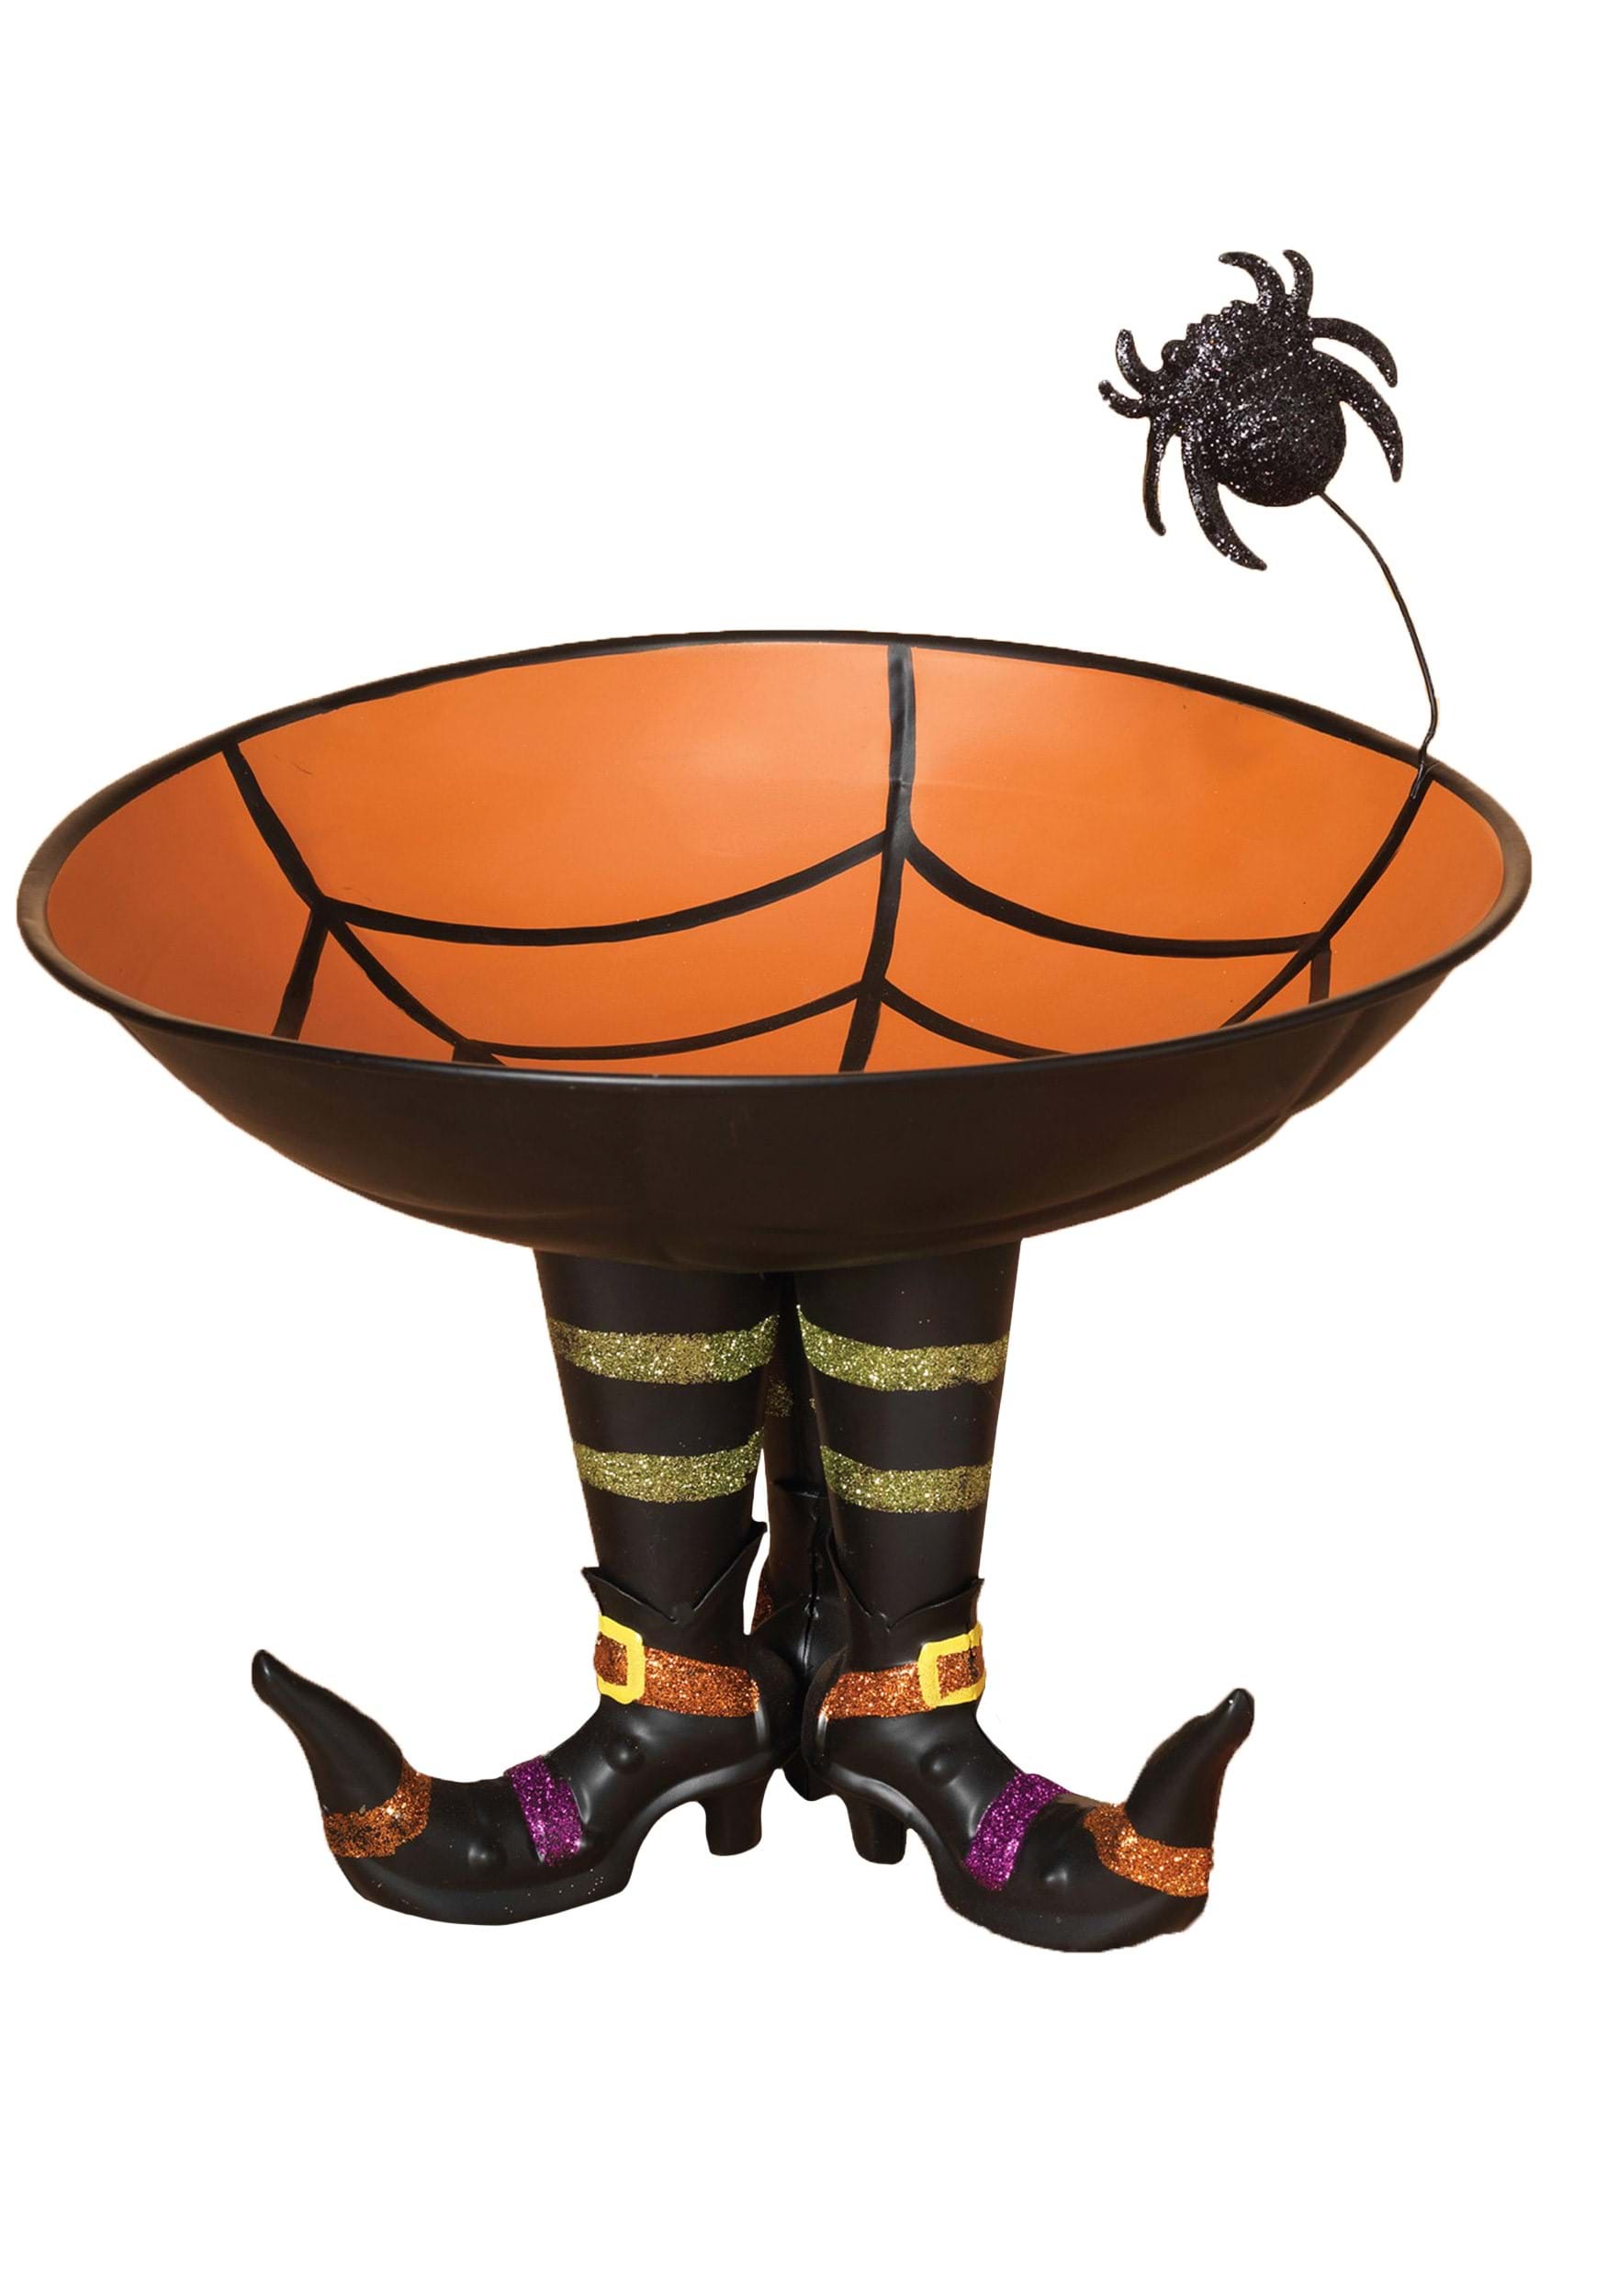 11.2" Metal Halloween Bowl on Witch Boots with Spider